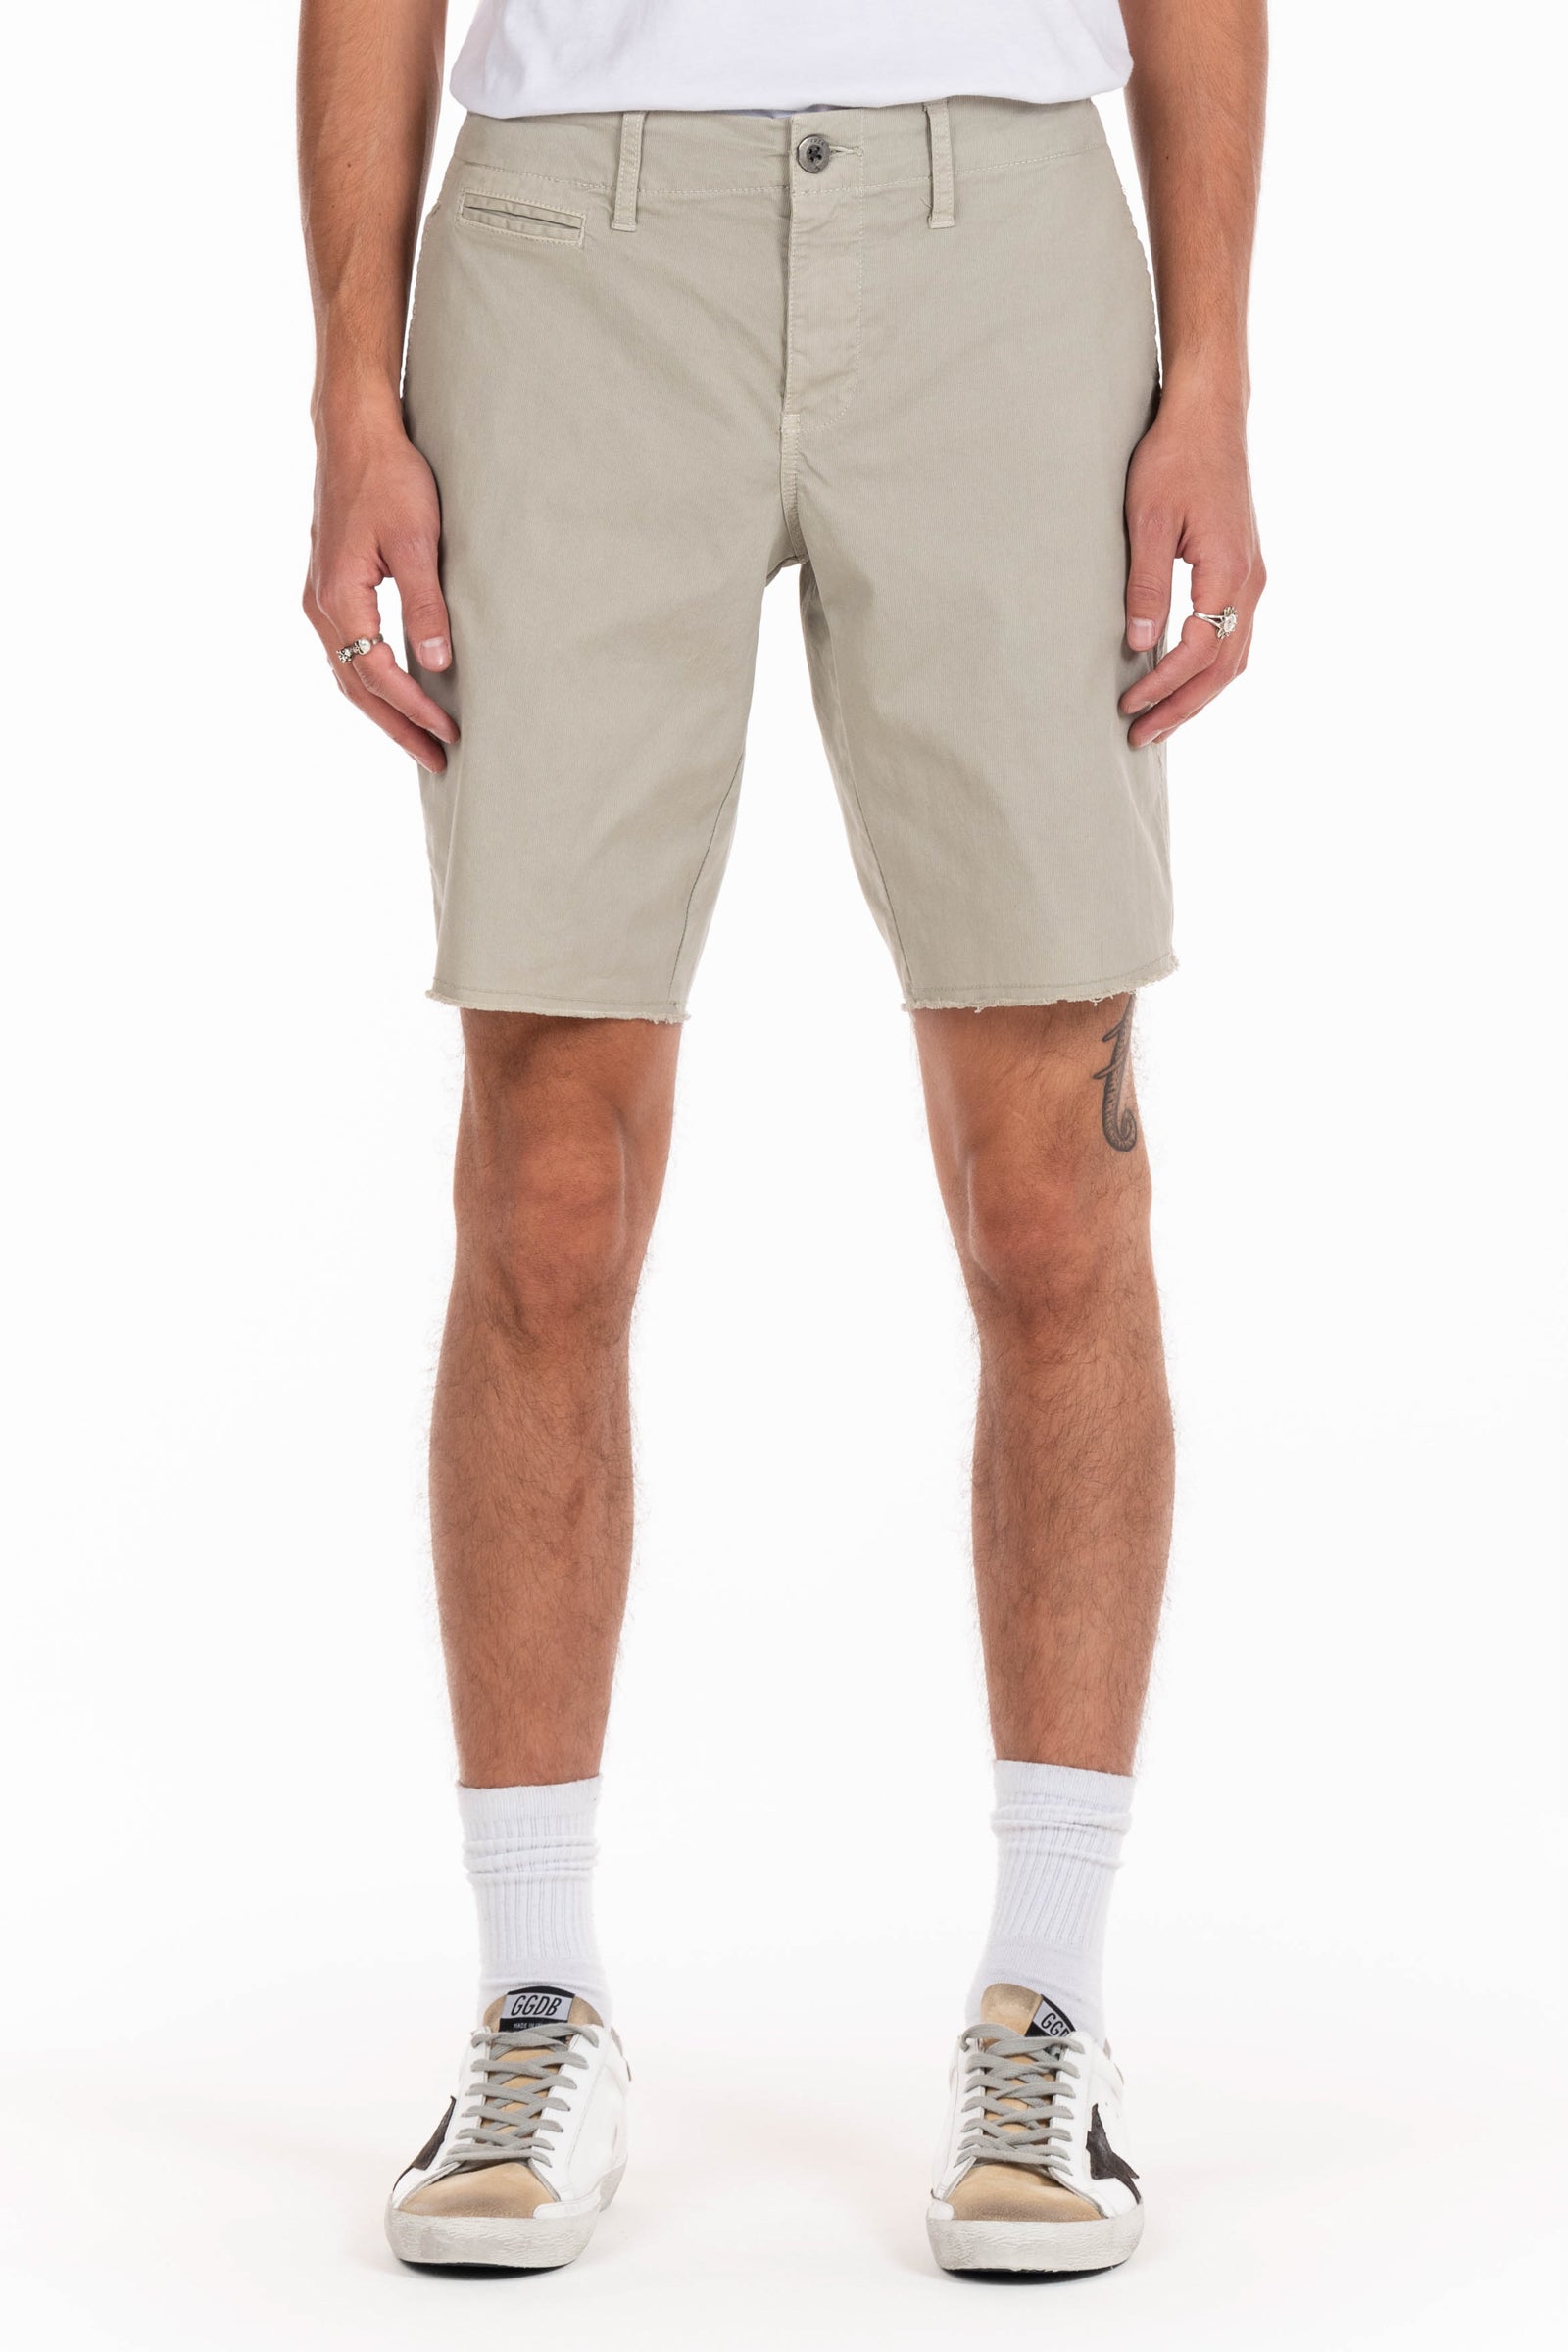 Original Paperbacks Rockland Chino Short in Bone on Model Cropped Front View